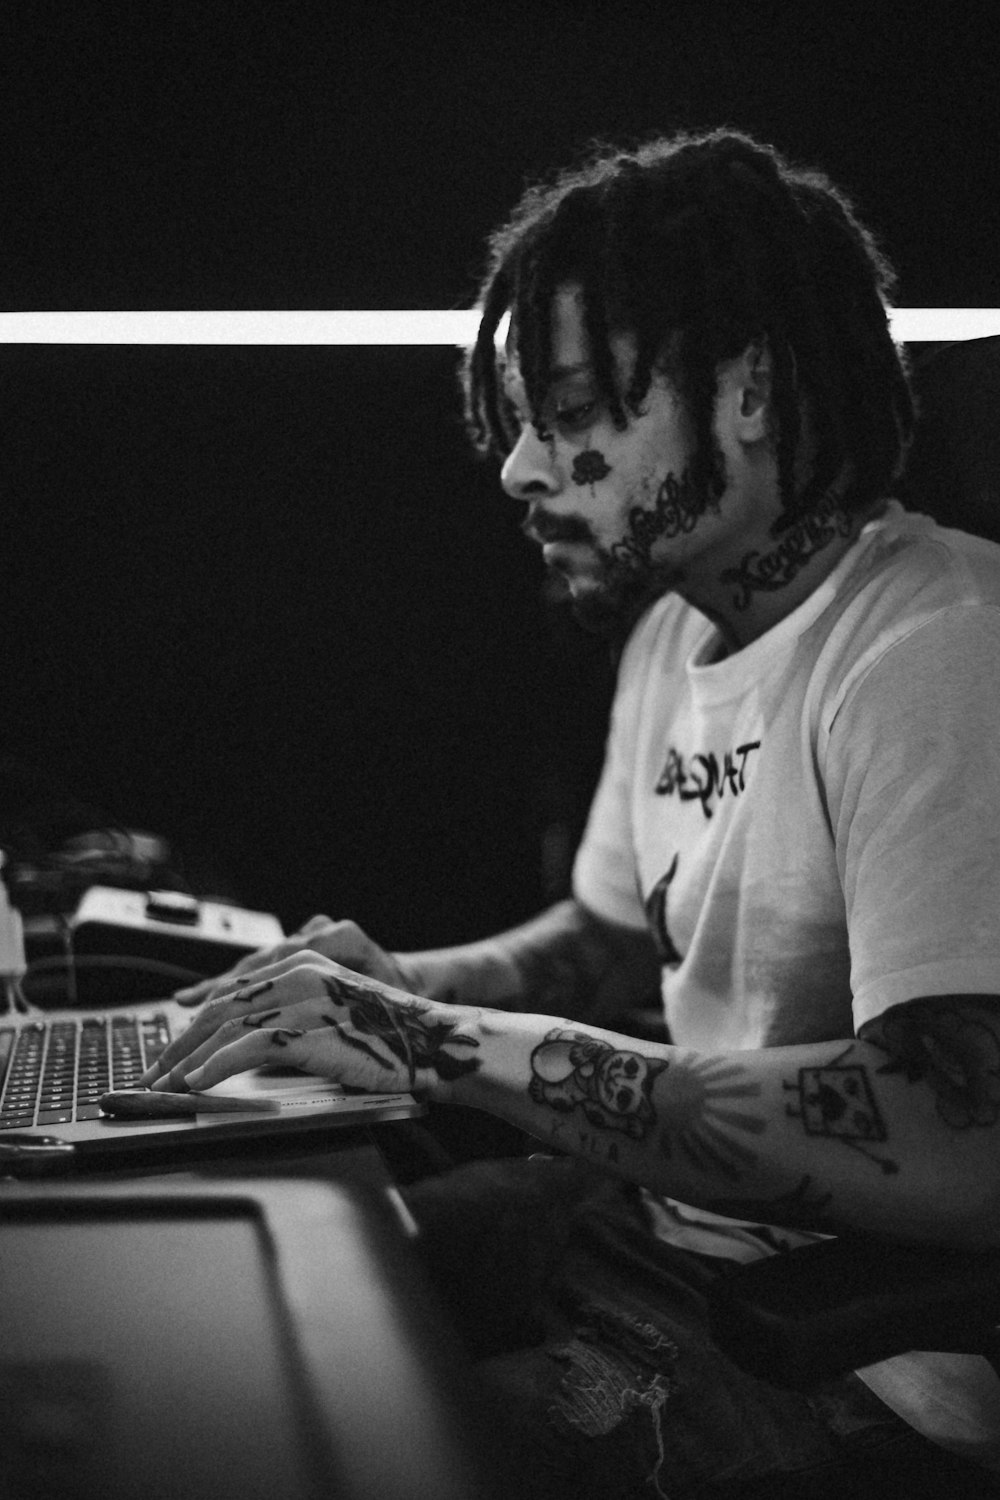 a man with dreadlocks sitting in front of a laptop